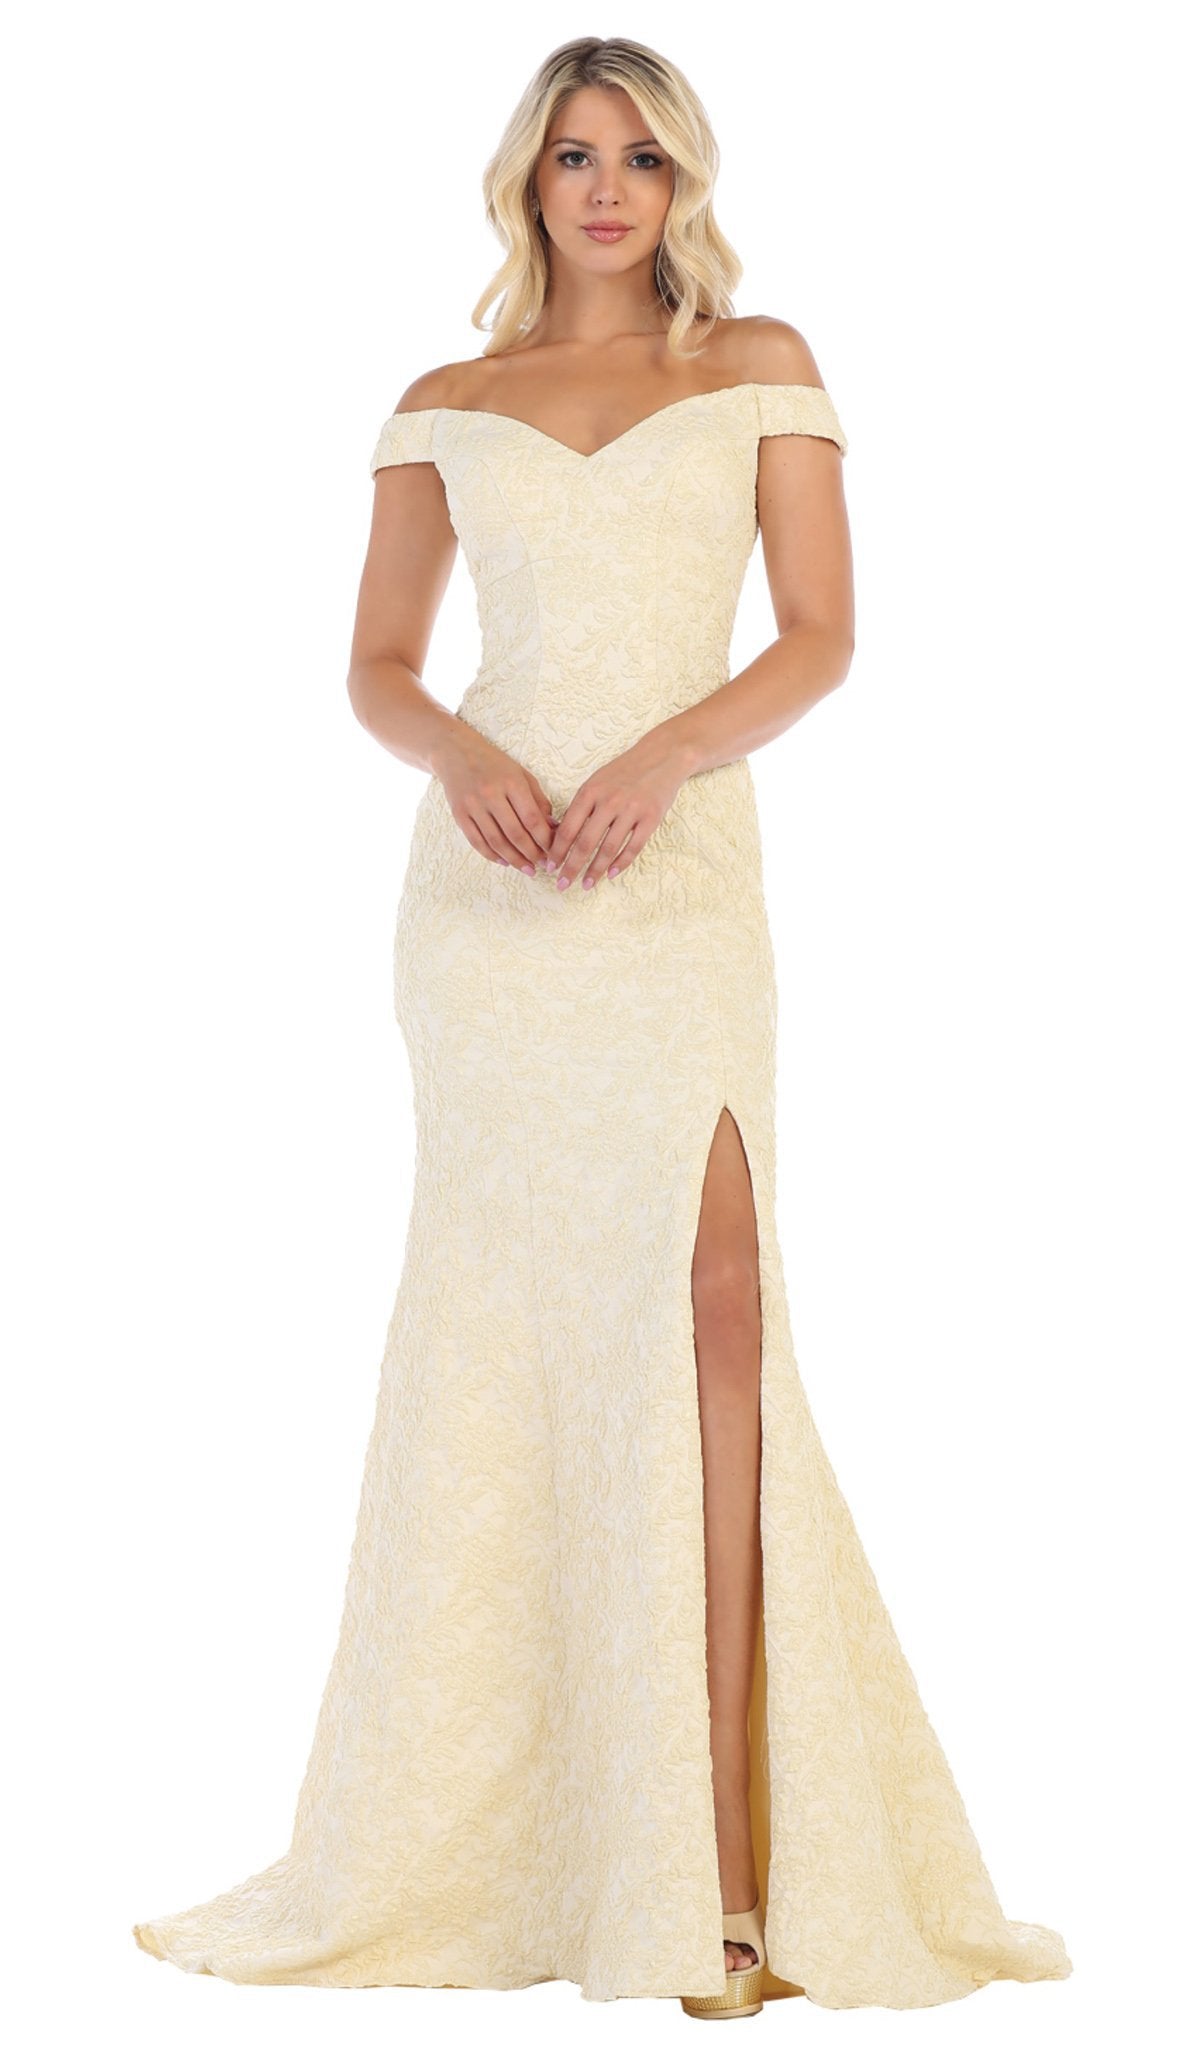 May Queen - RQ7663 Off-Shoulder Trumpet Dress With High Slit Prom Dresses 4 / Yellow